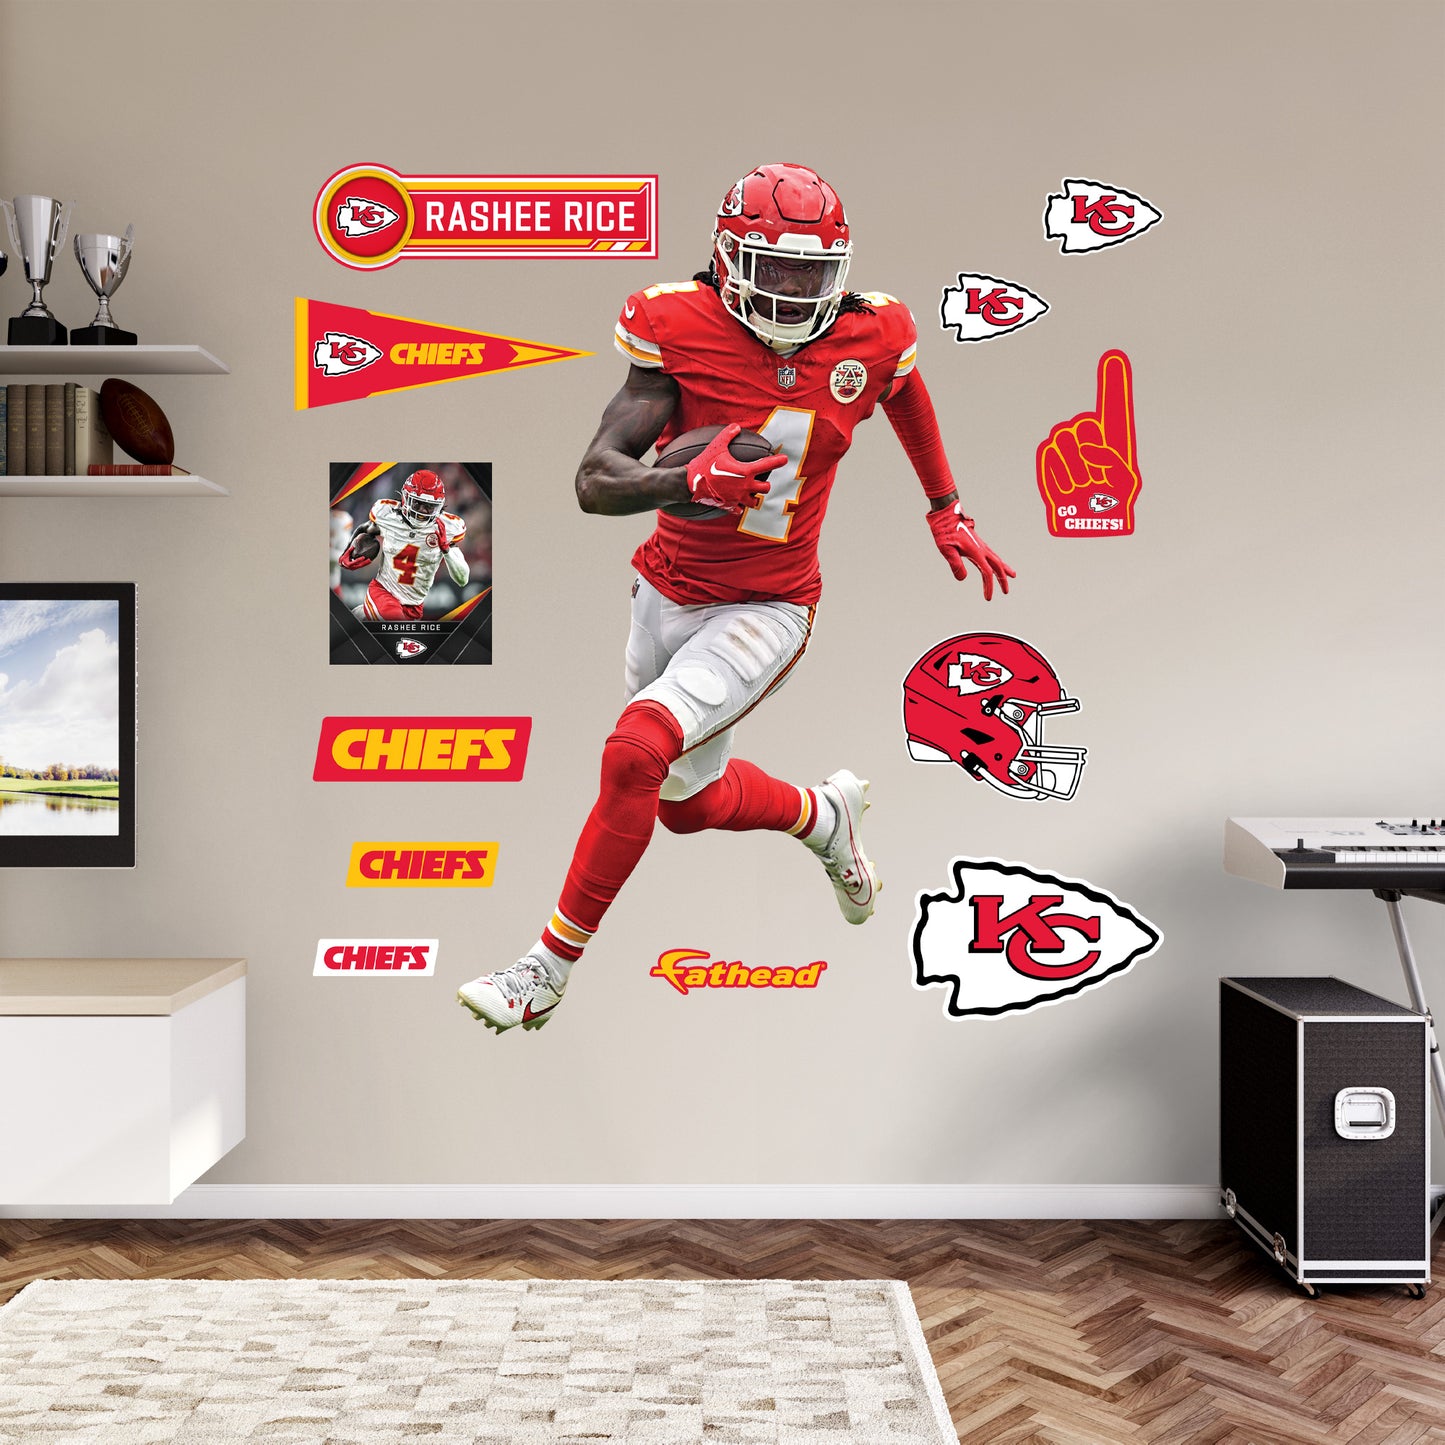 Kansas City Chiefs: Rashee Rice         - Officially Licensed NFL Removable     Adhesive Decal